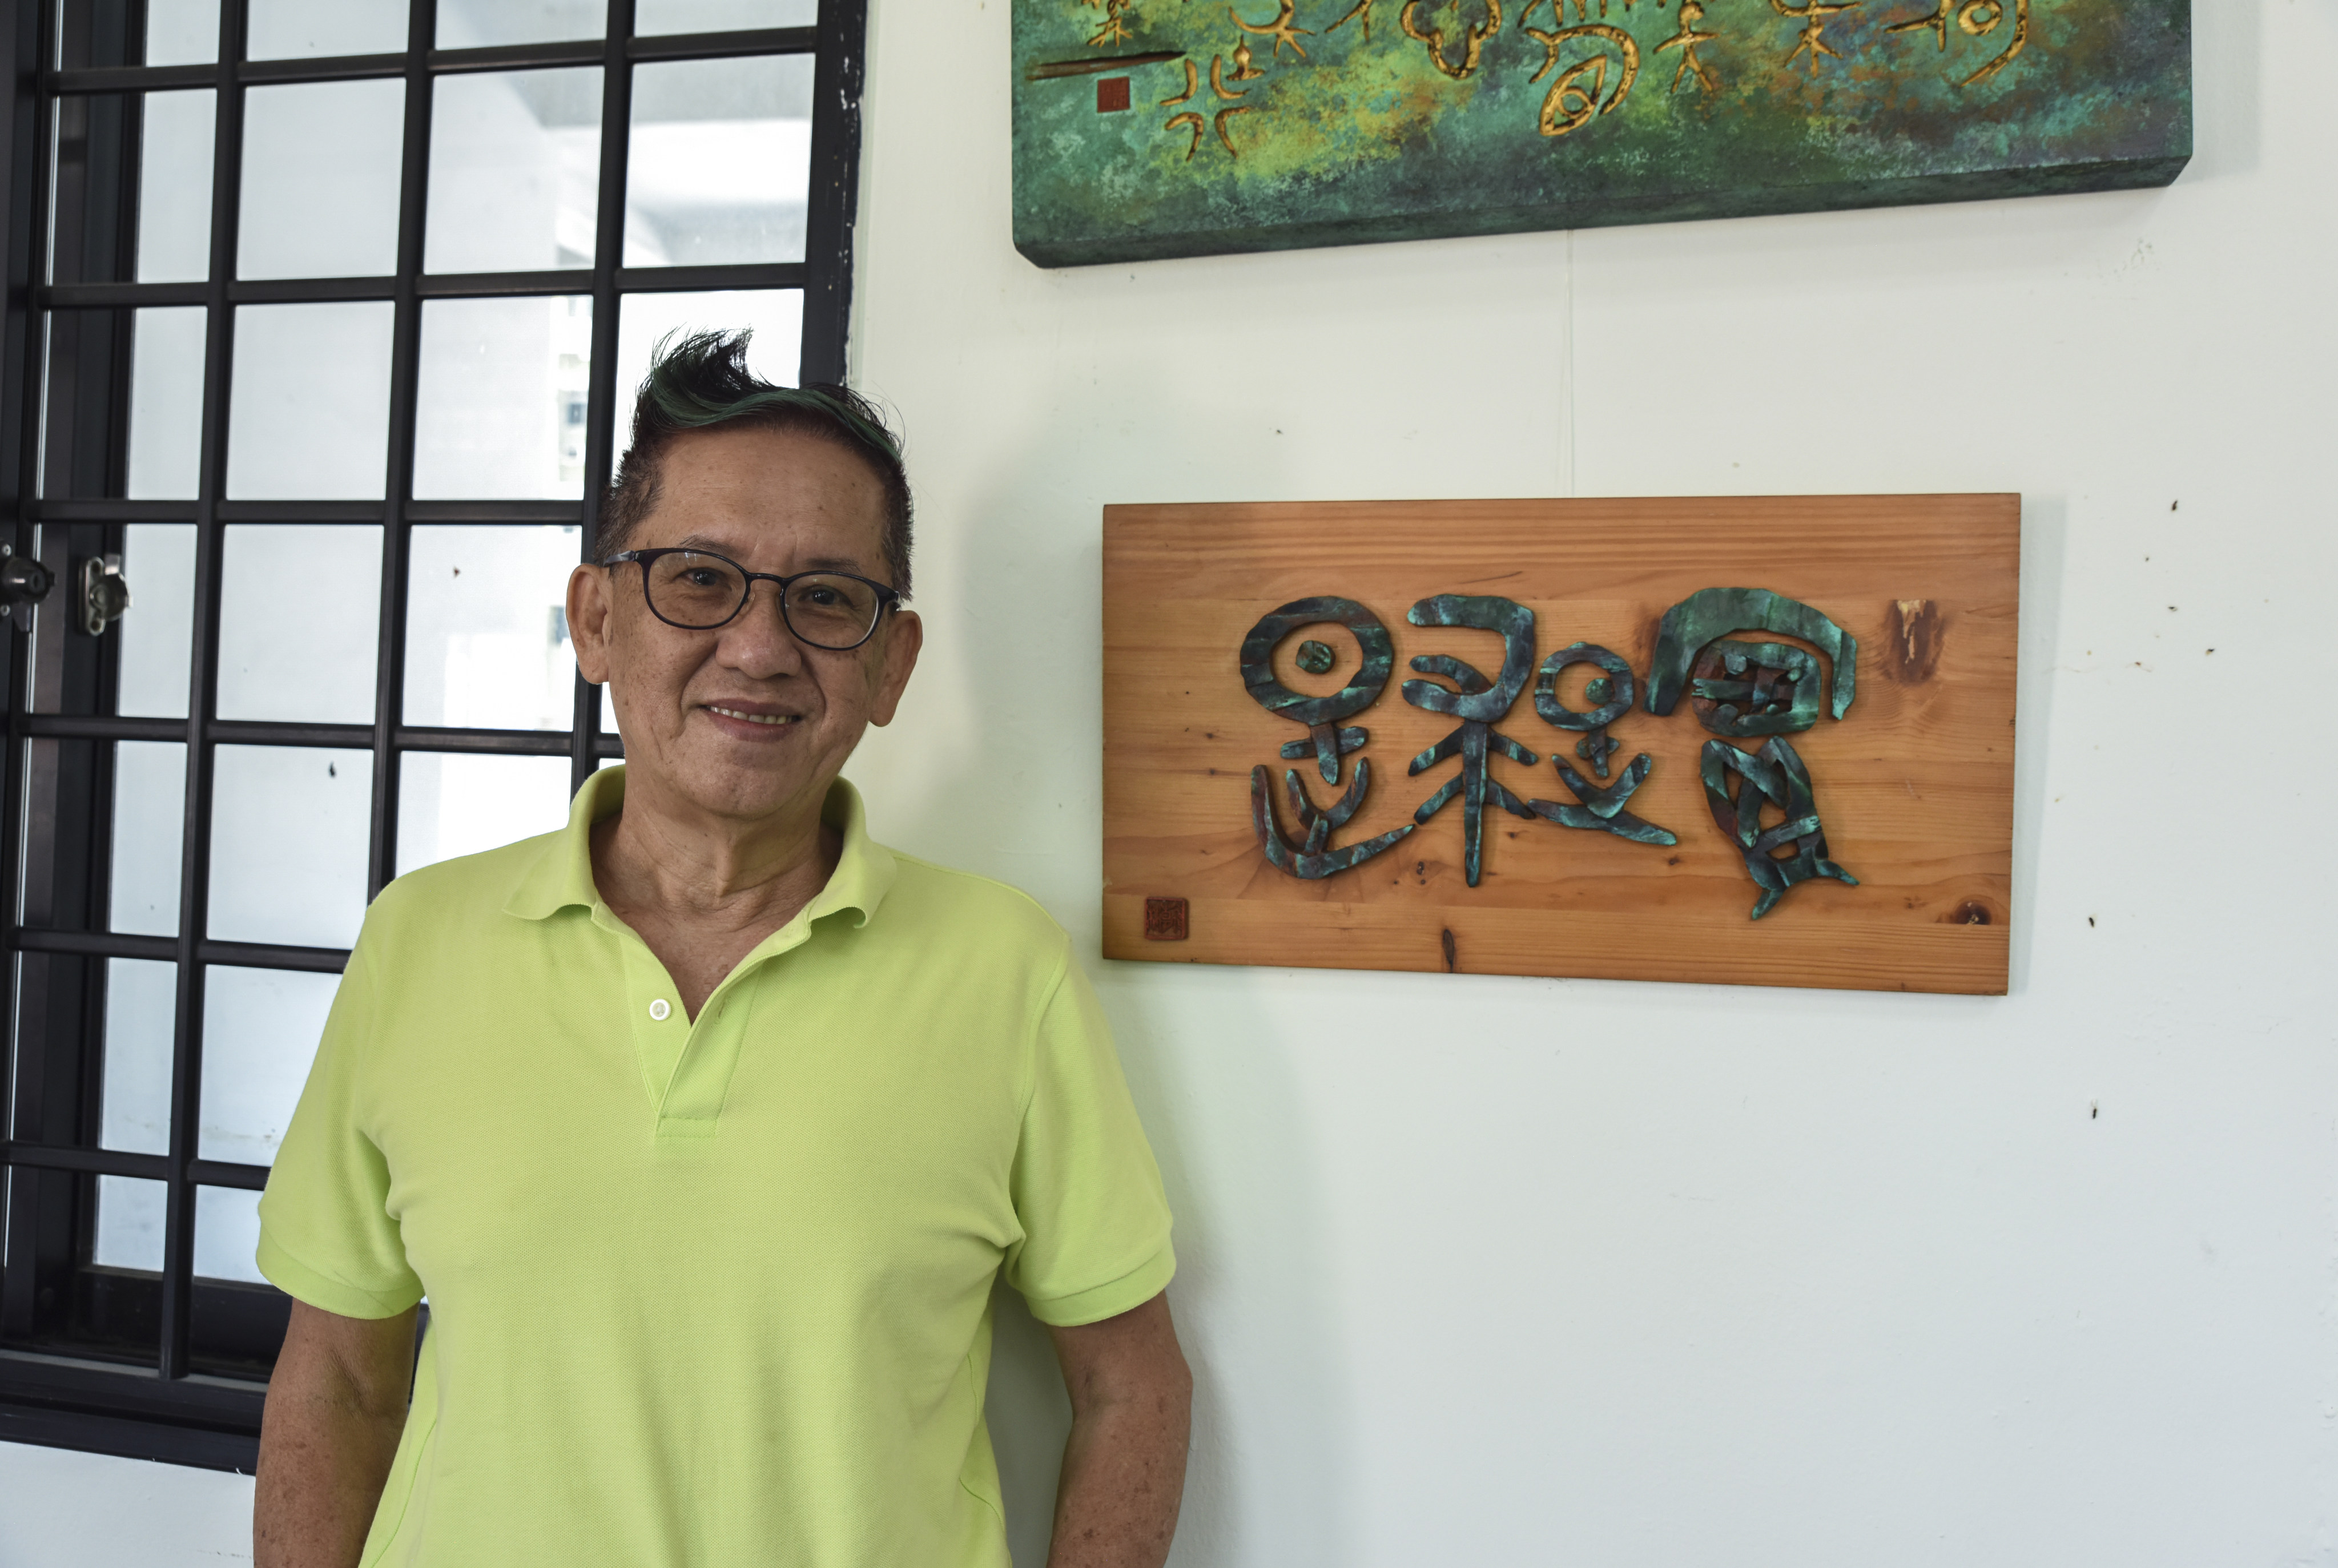 Cheh Kai Hon is one of Singapore’s last signboard makers. Photo: Ronan O’Connell